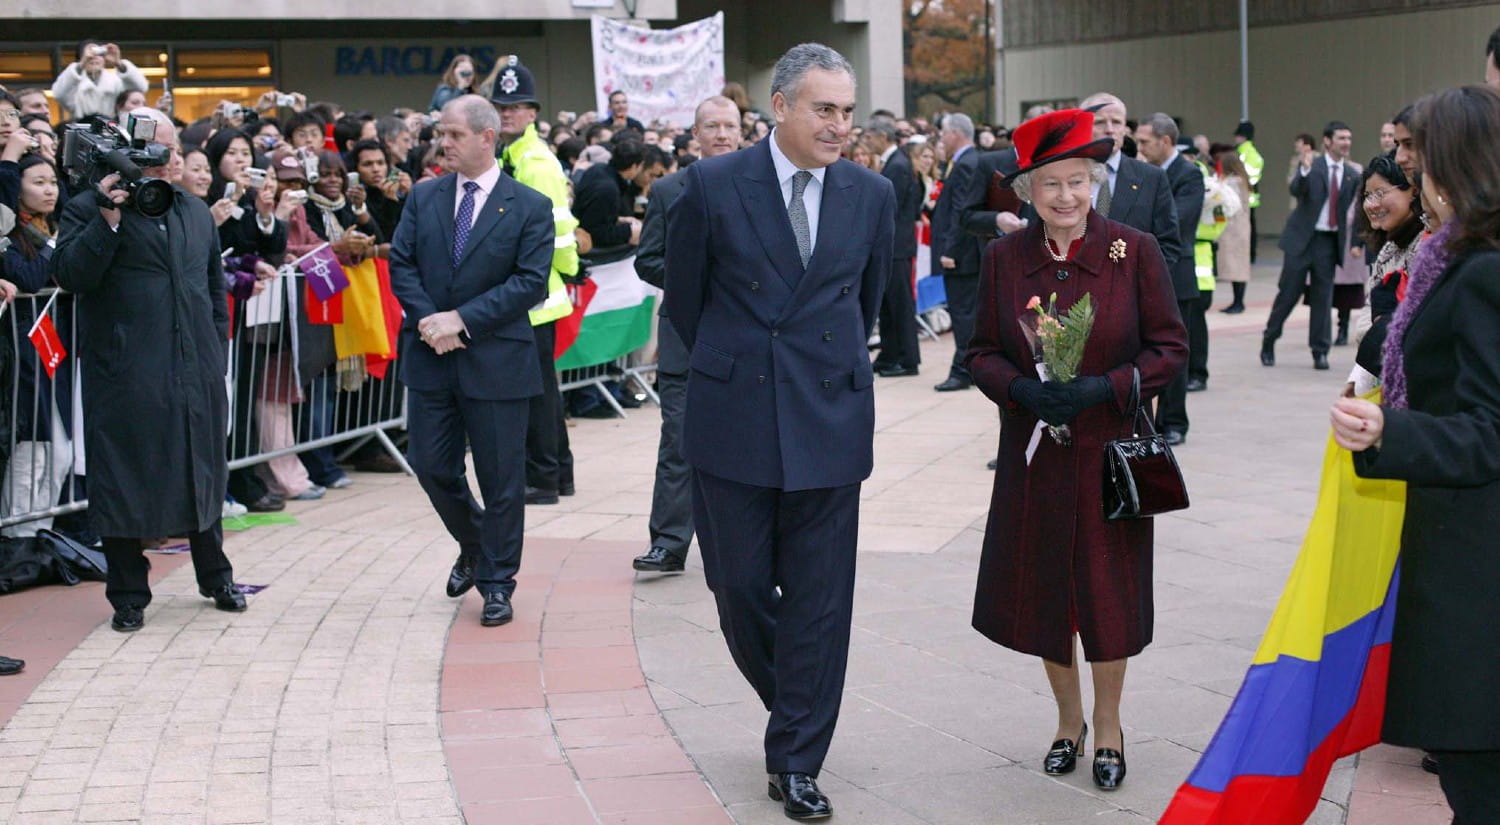 Her Majesty the Queen visits the Colchester Campus in 2004